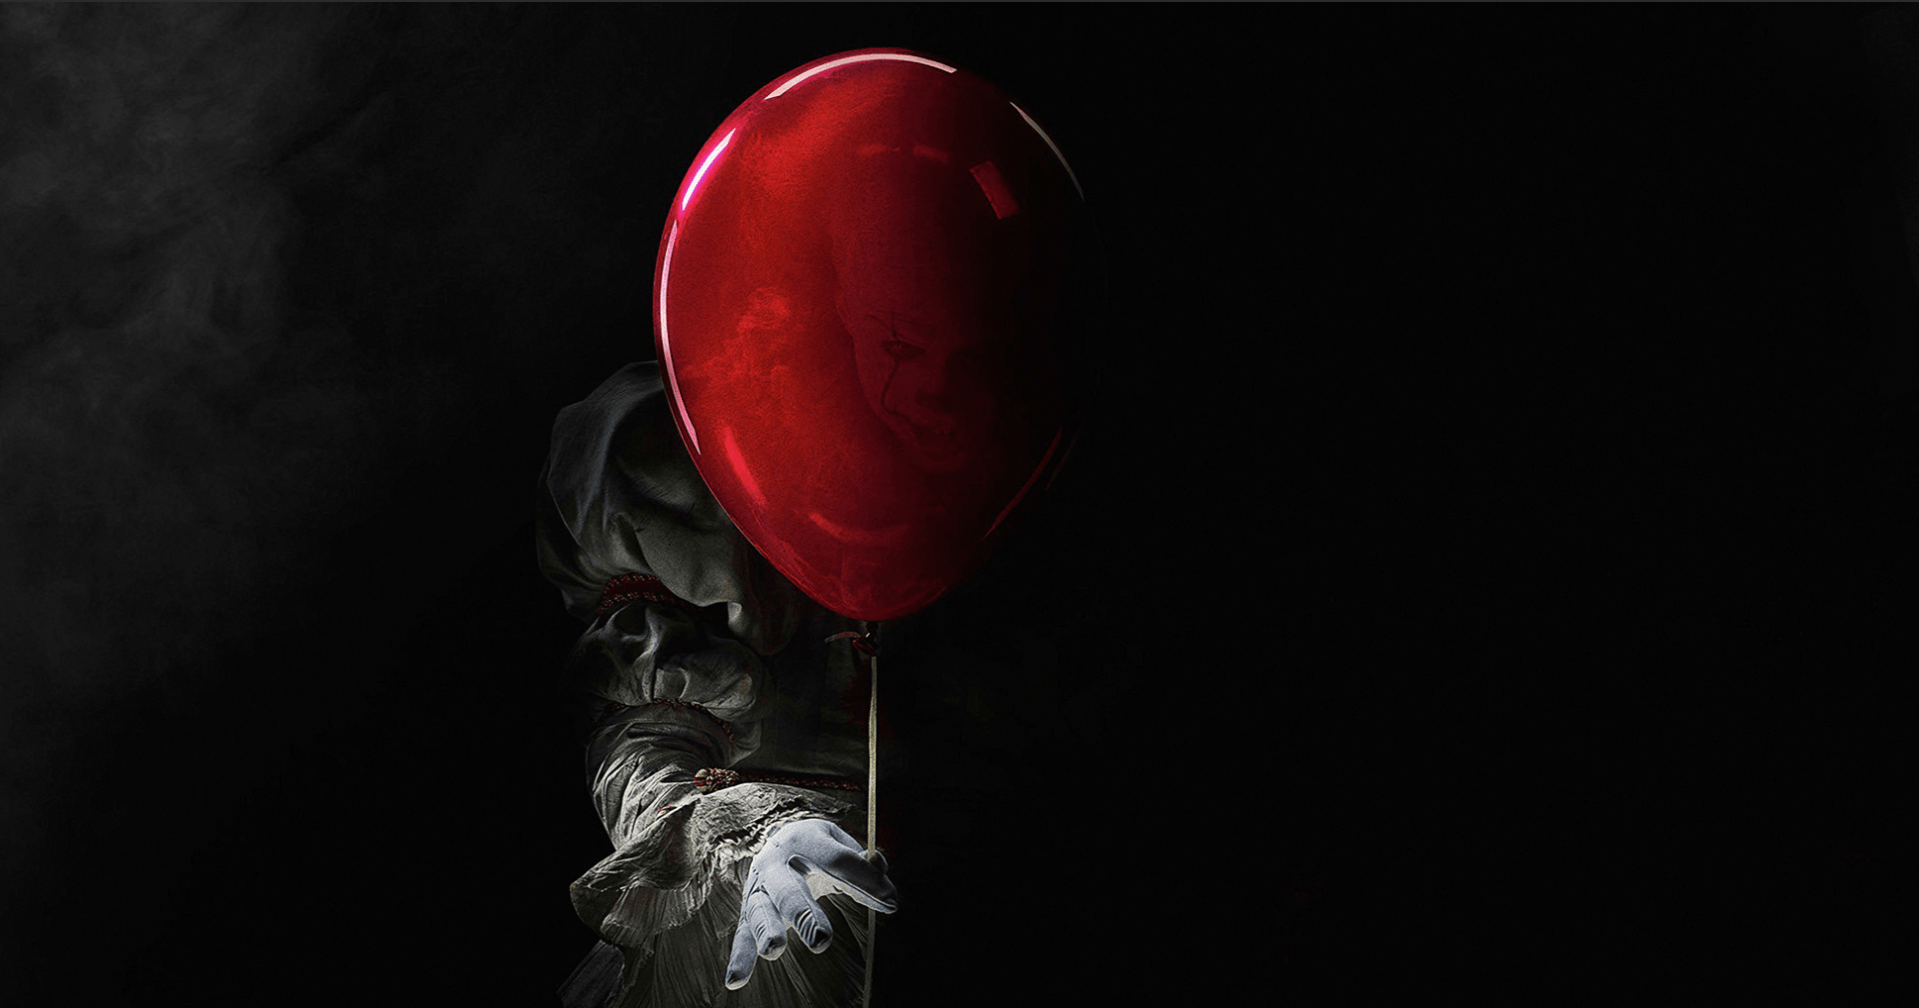 Pennywise The Clown Wallpaper